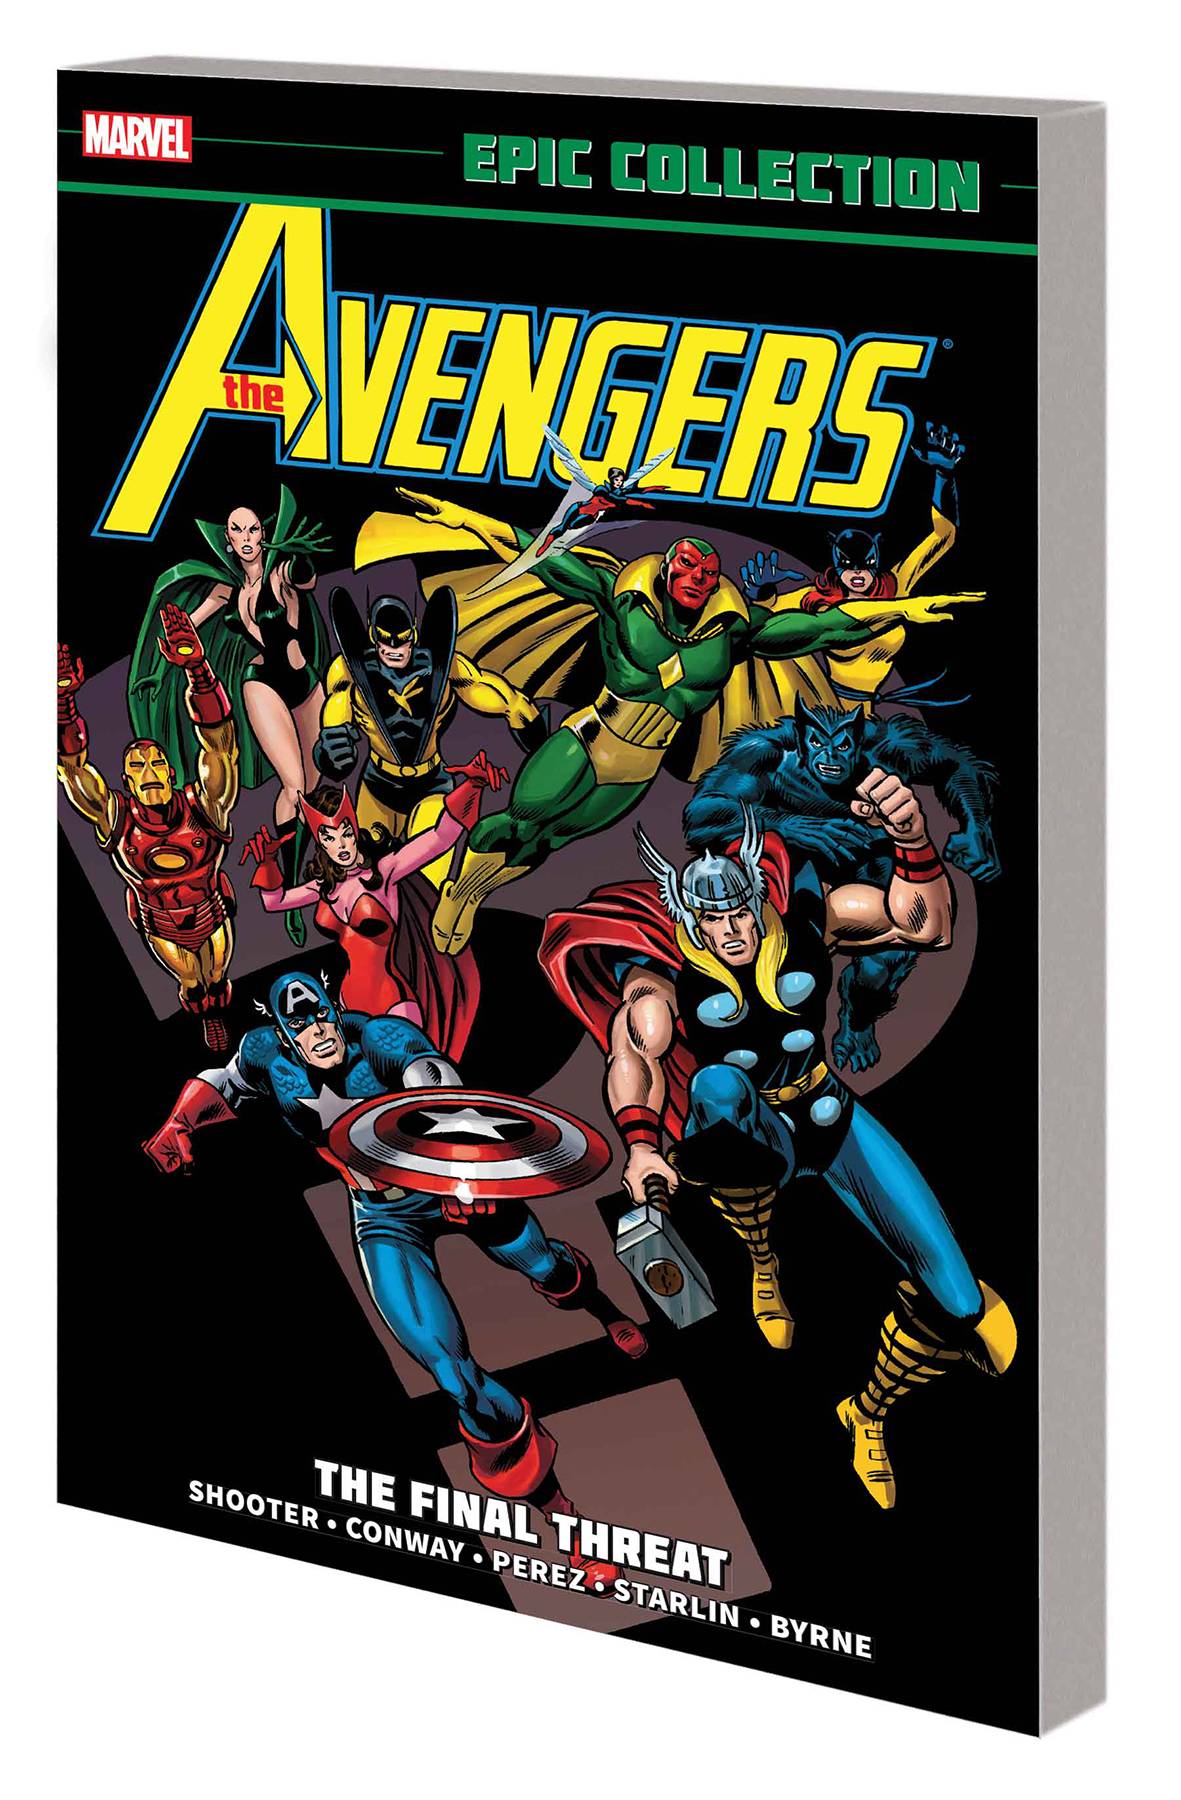 AVENGERS EPIC COLLECTION TP FINAL THREAT NEW PTG